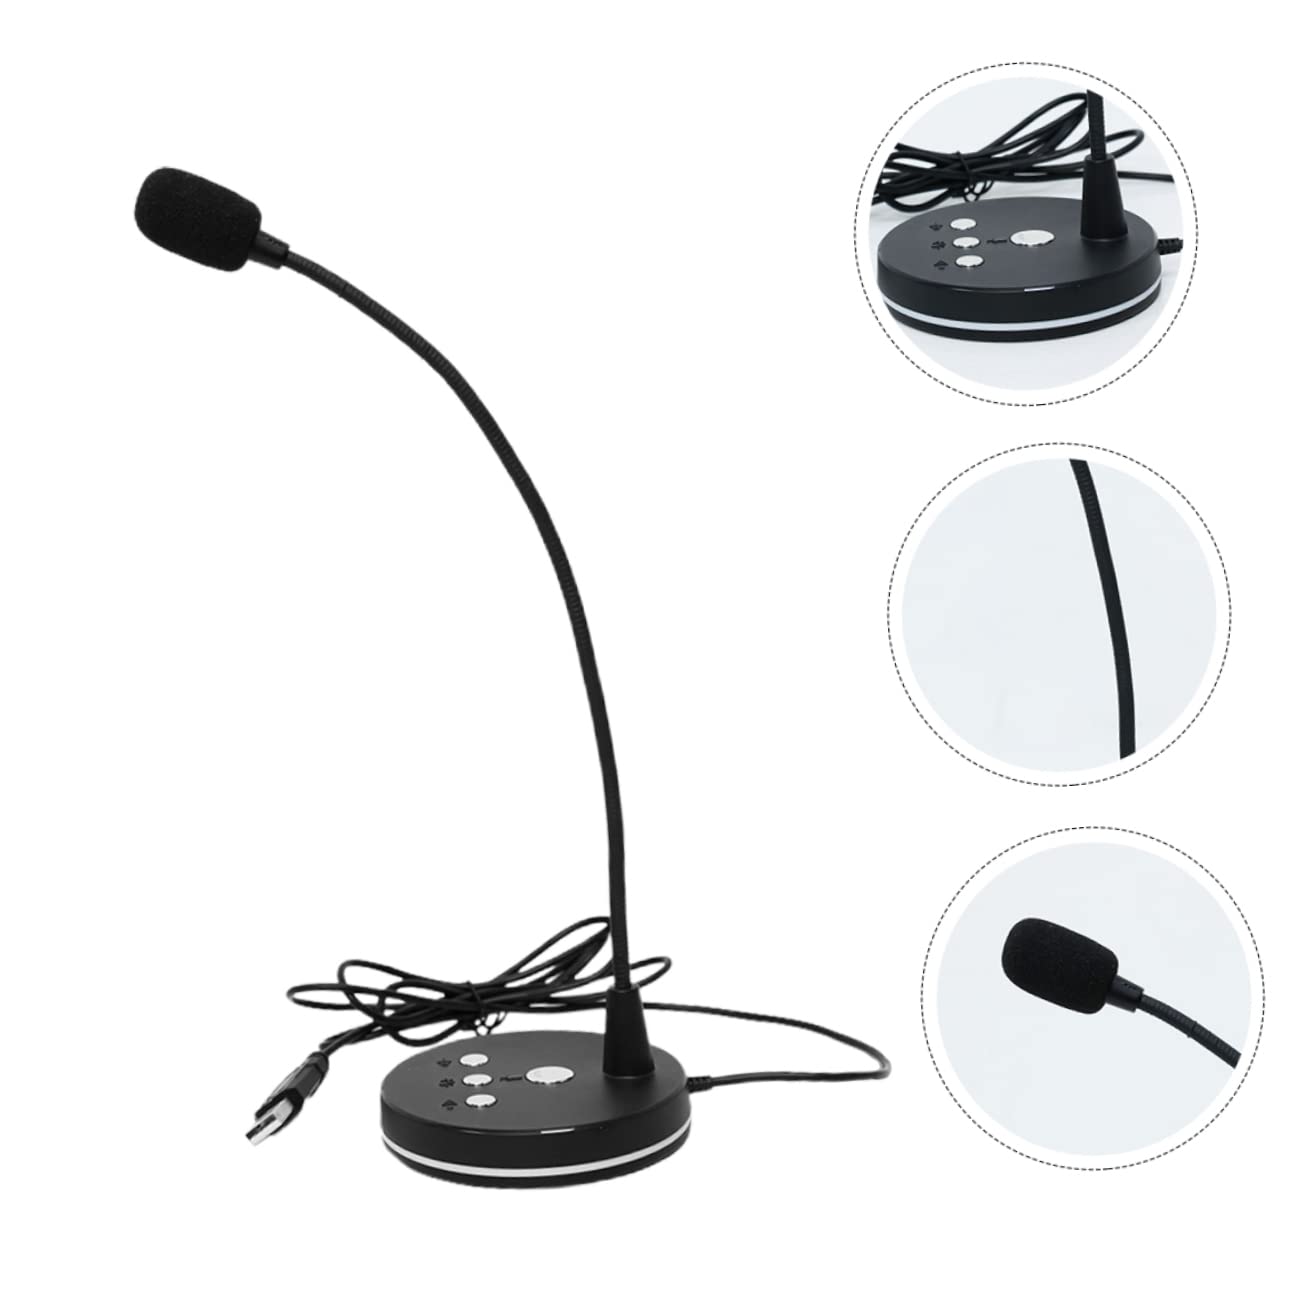 Parliky Microphone Desk Computer Stand Game Chatting Tool Condenser Gaming Mic Laptop Adjustable Stand Adjustable Computer Stand Adjustable Laptop Stand Tablet Accessories Abs